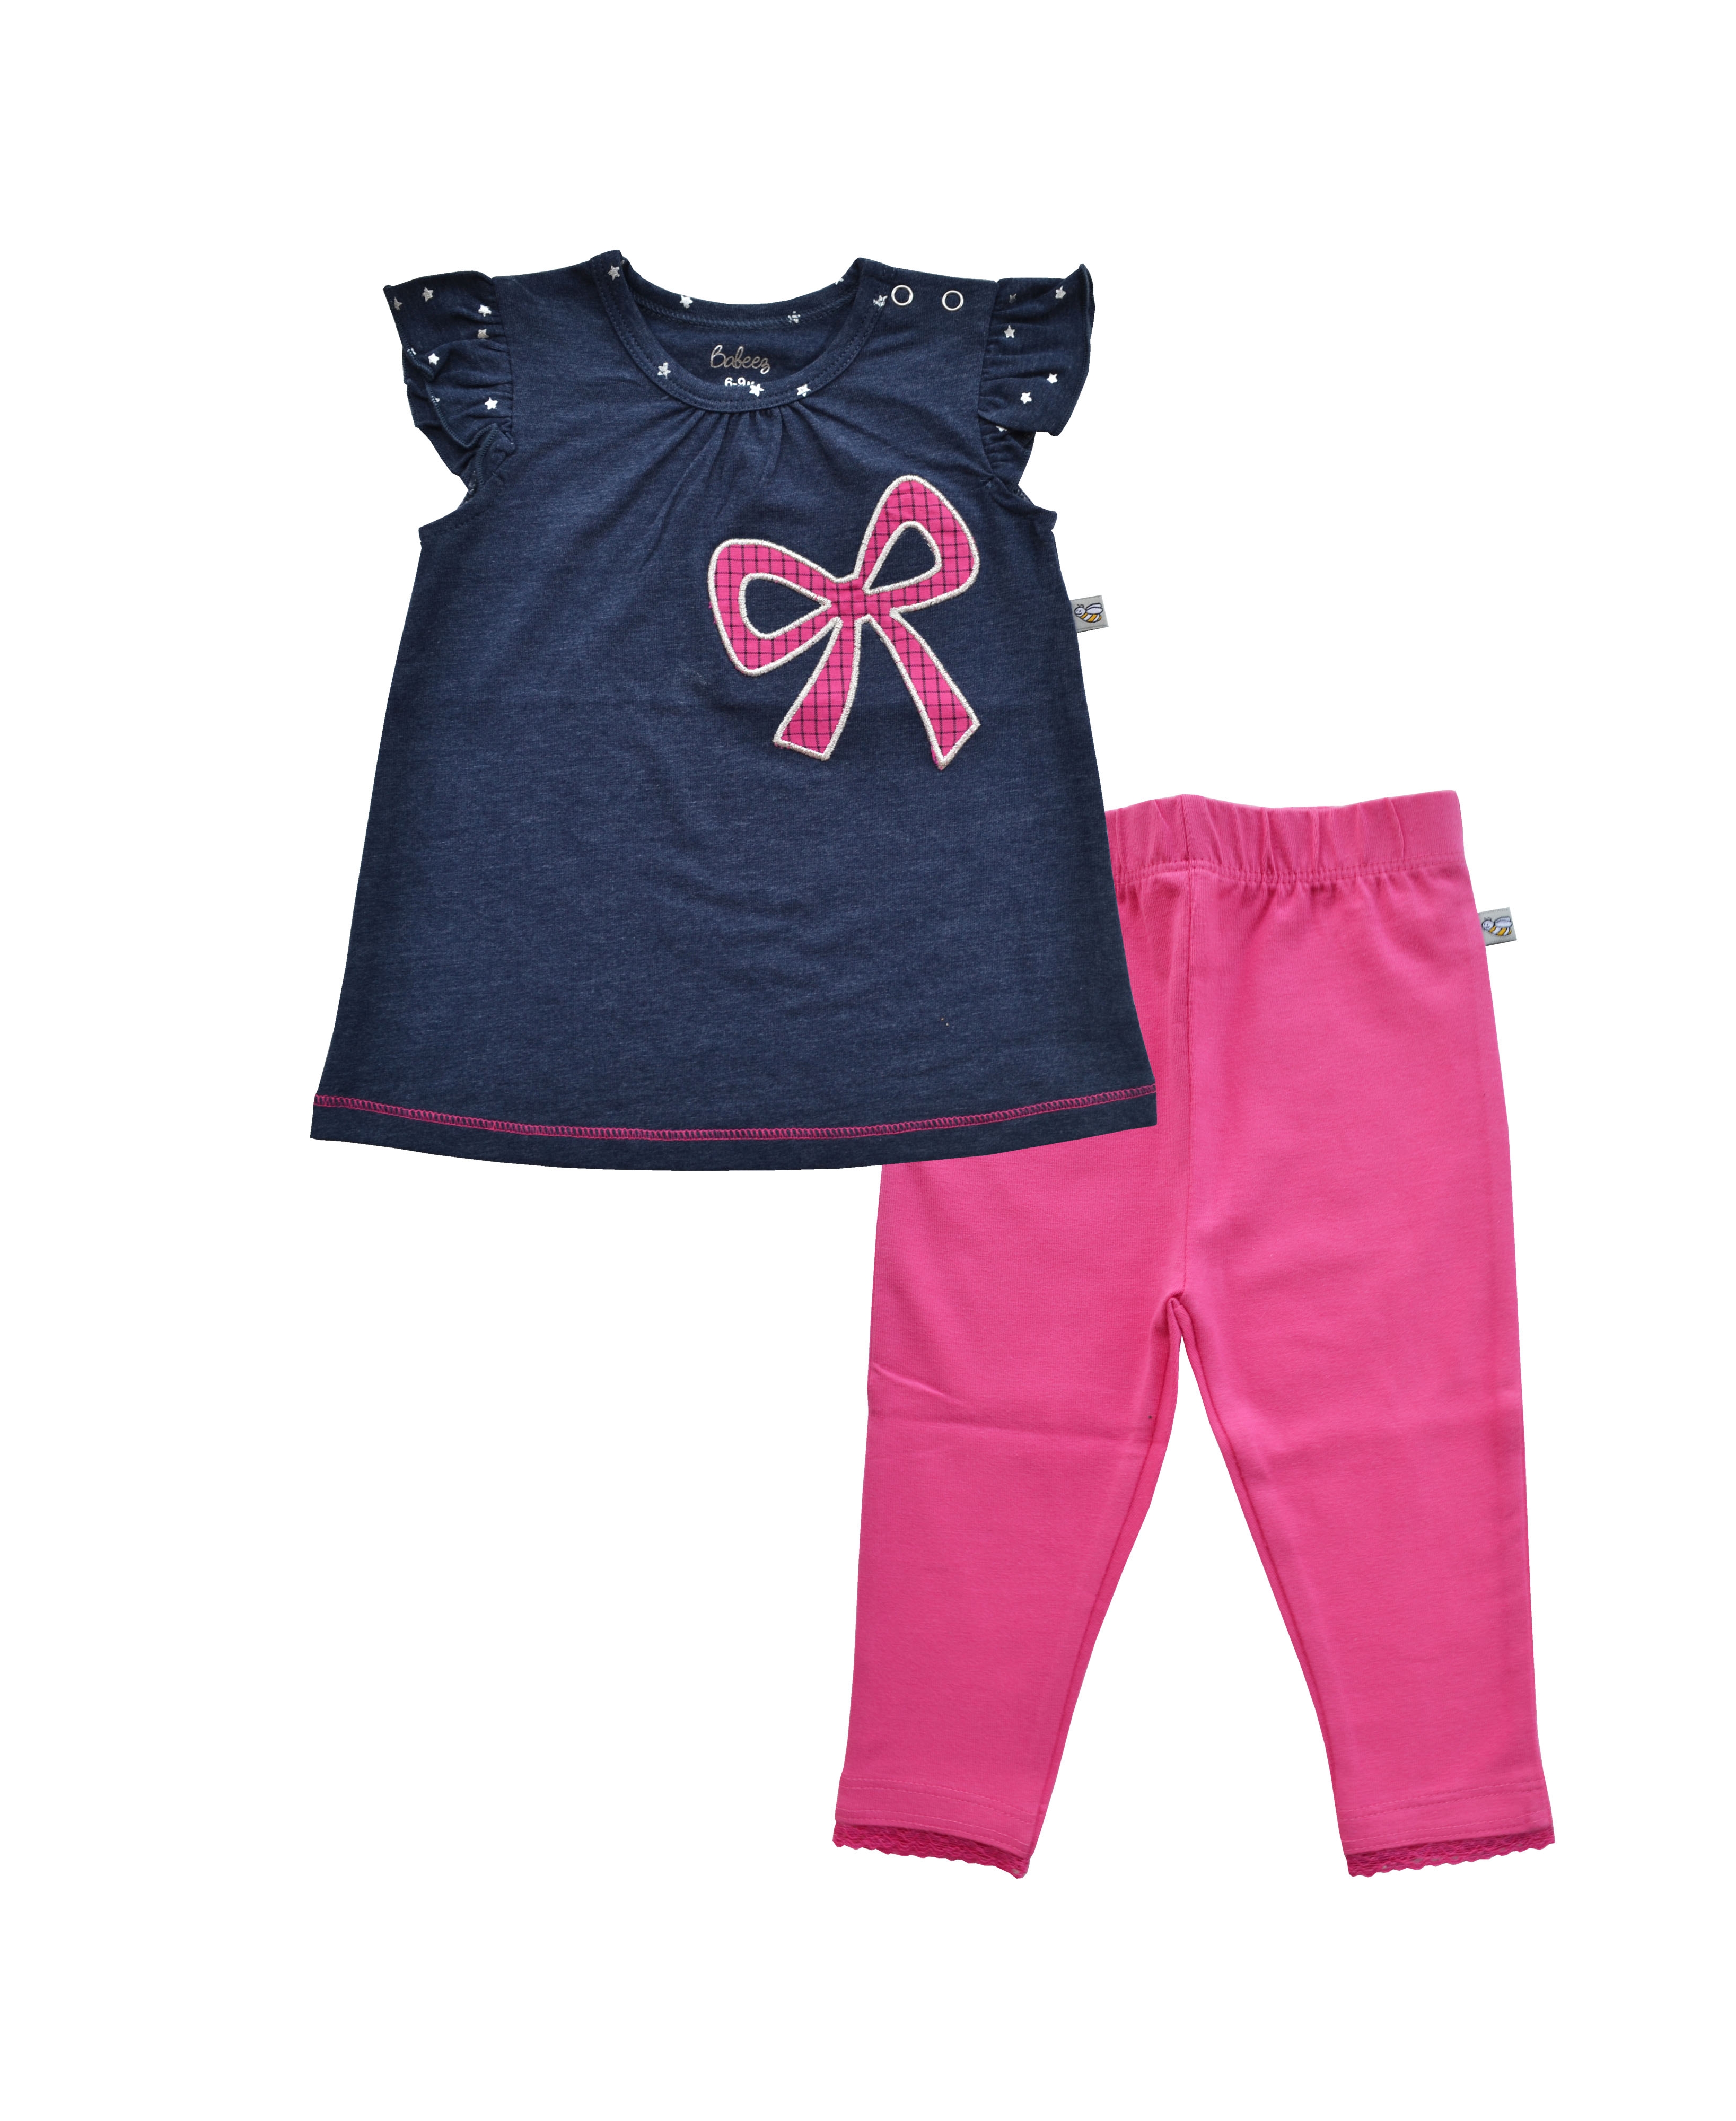 Babeez | Denim Blue Top With Pink Bow Applique and Fushia Solid Legging (95% Cotton 5% Elasthan) undefined